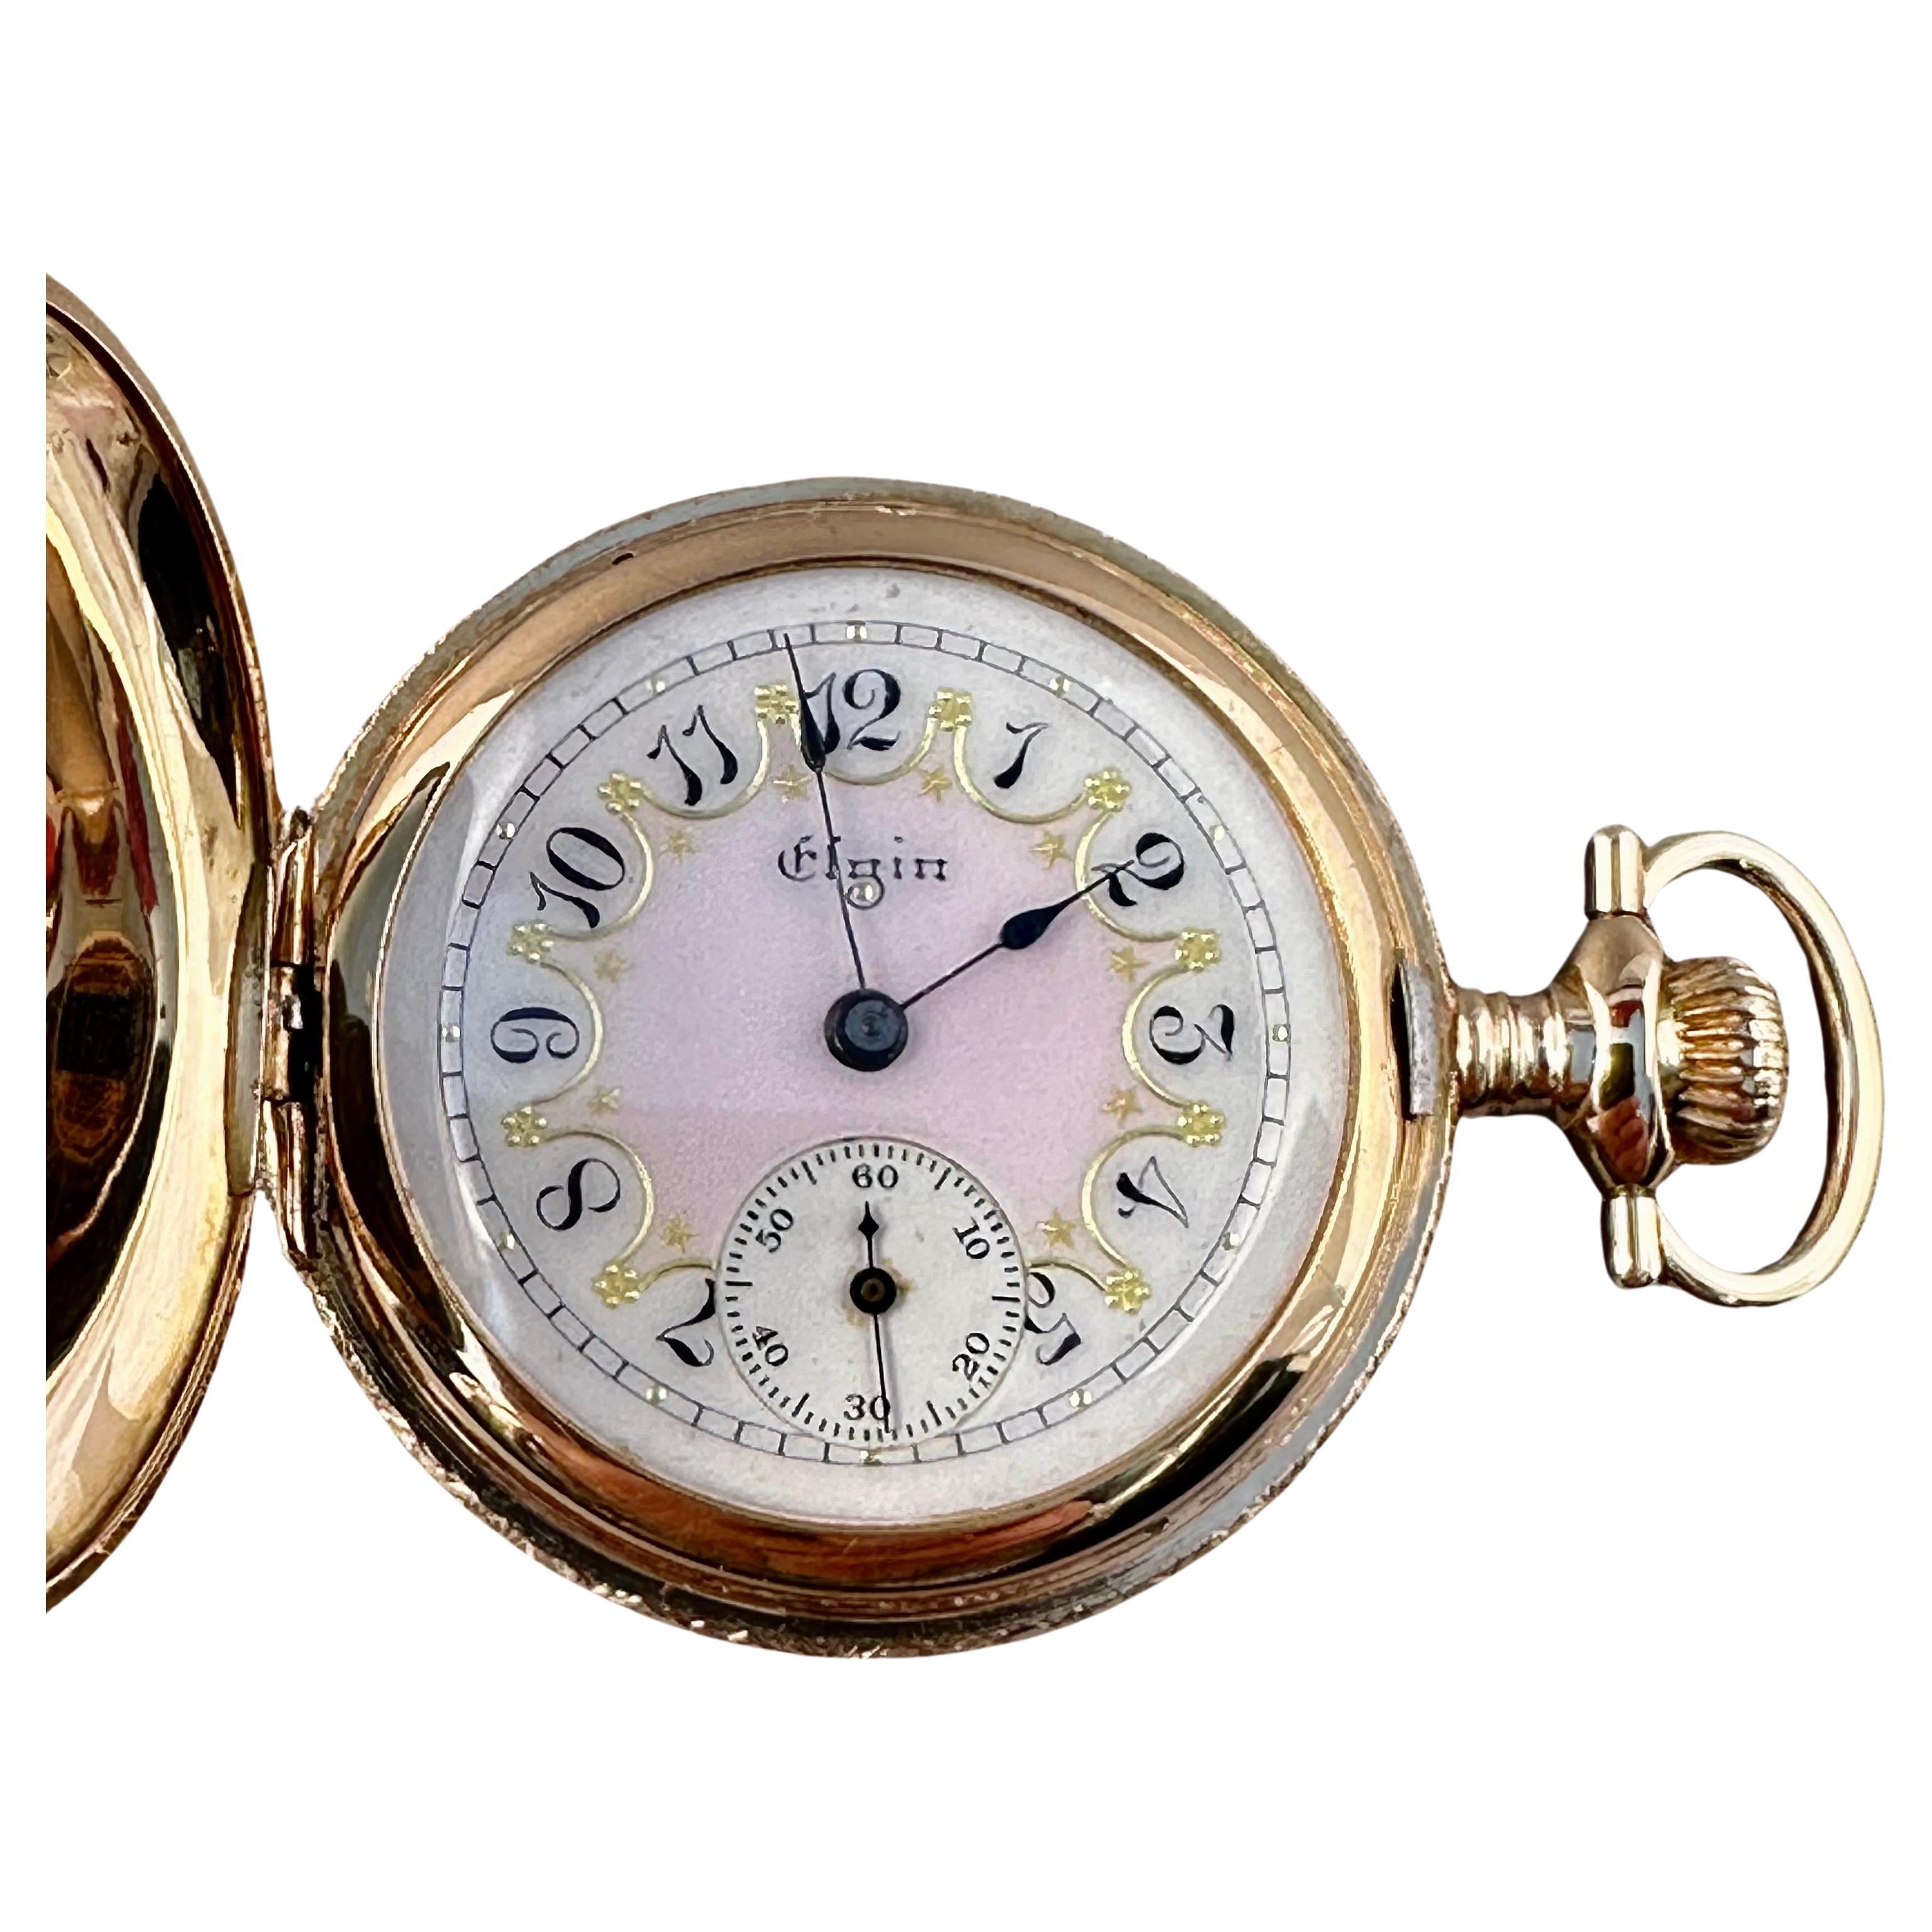 Elgin National Watch Co. Solid 14K Gold Pocket Watch in Mint Condition For Sale